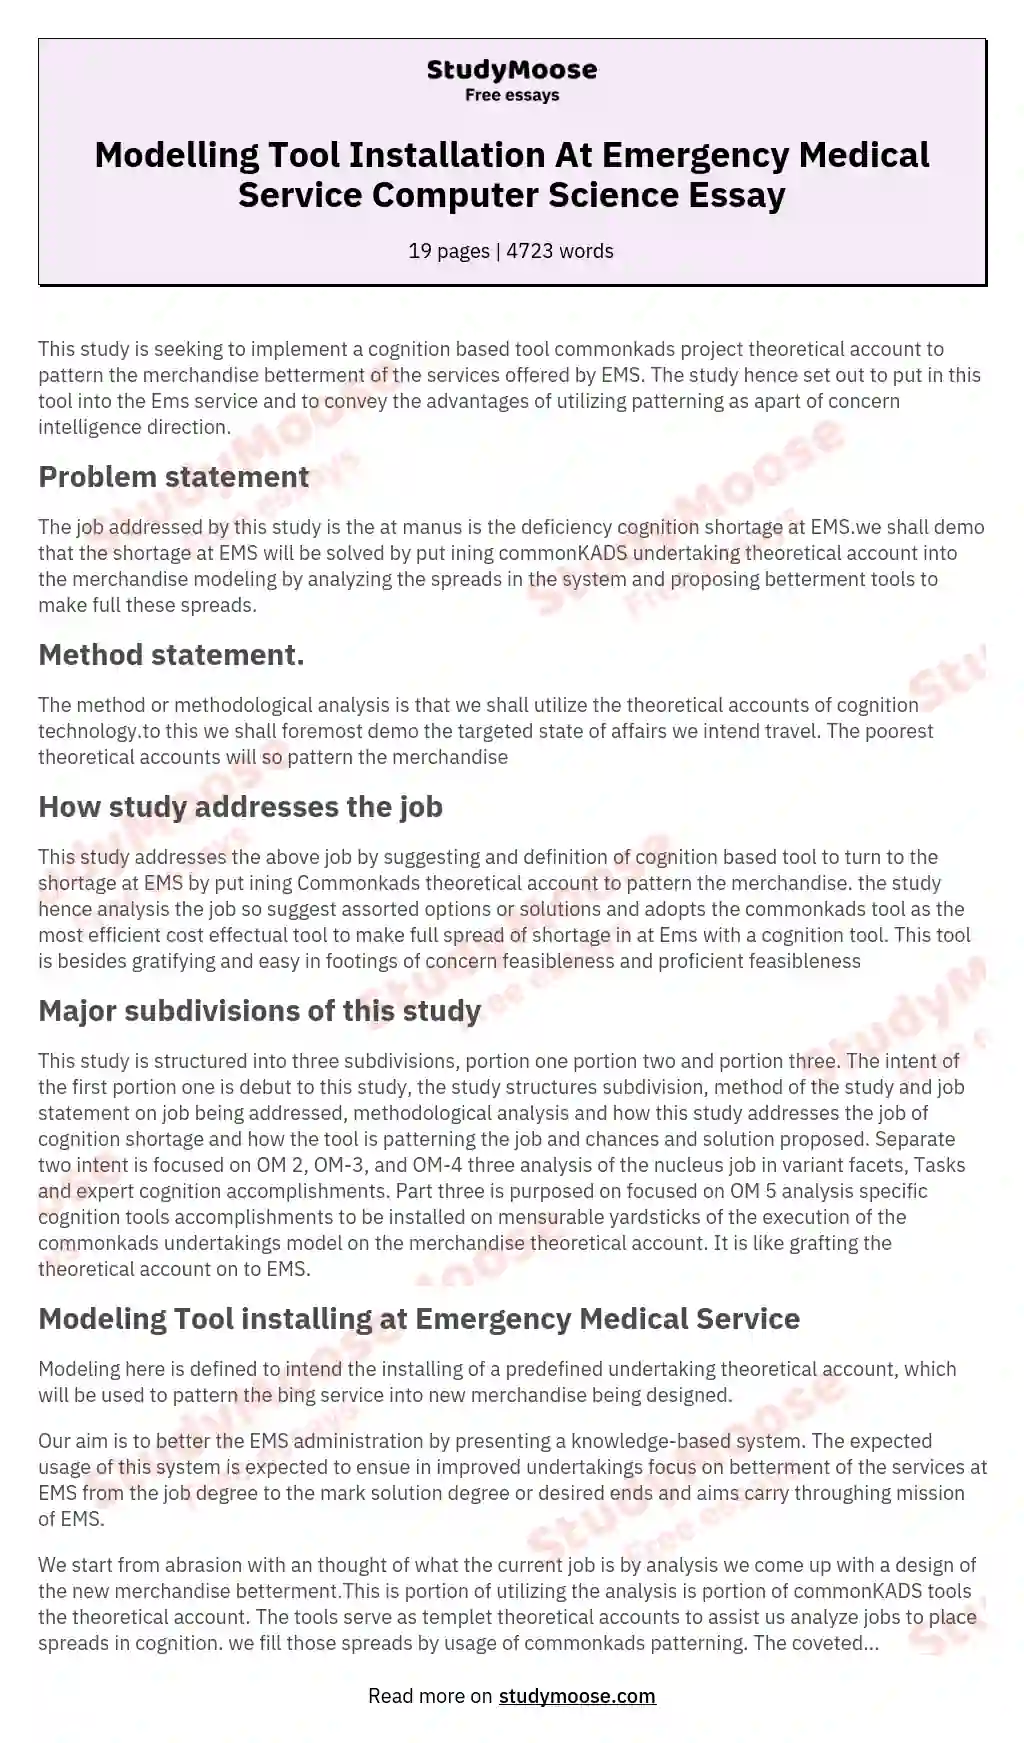 Modelling Tool Installation At Emergency Medical Service Computer Science Essay essay